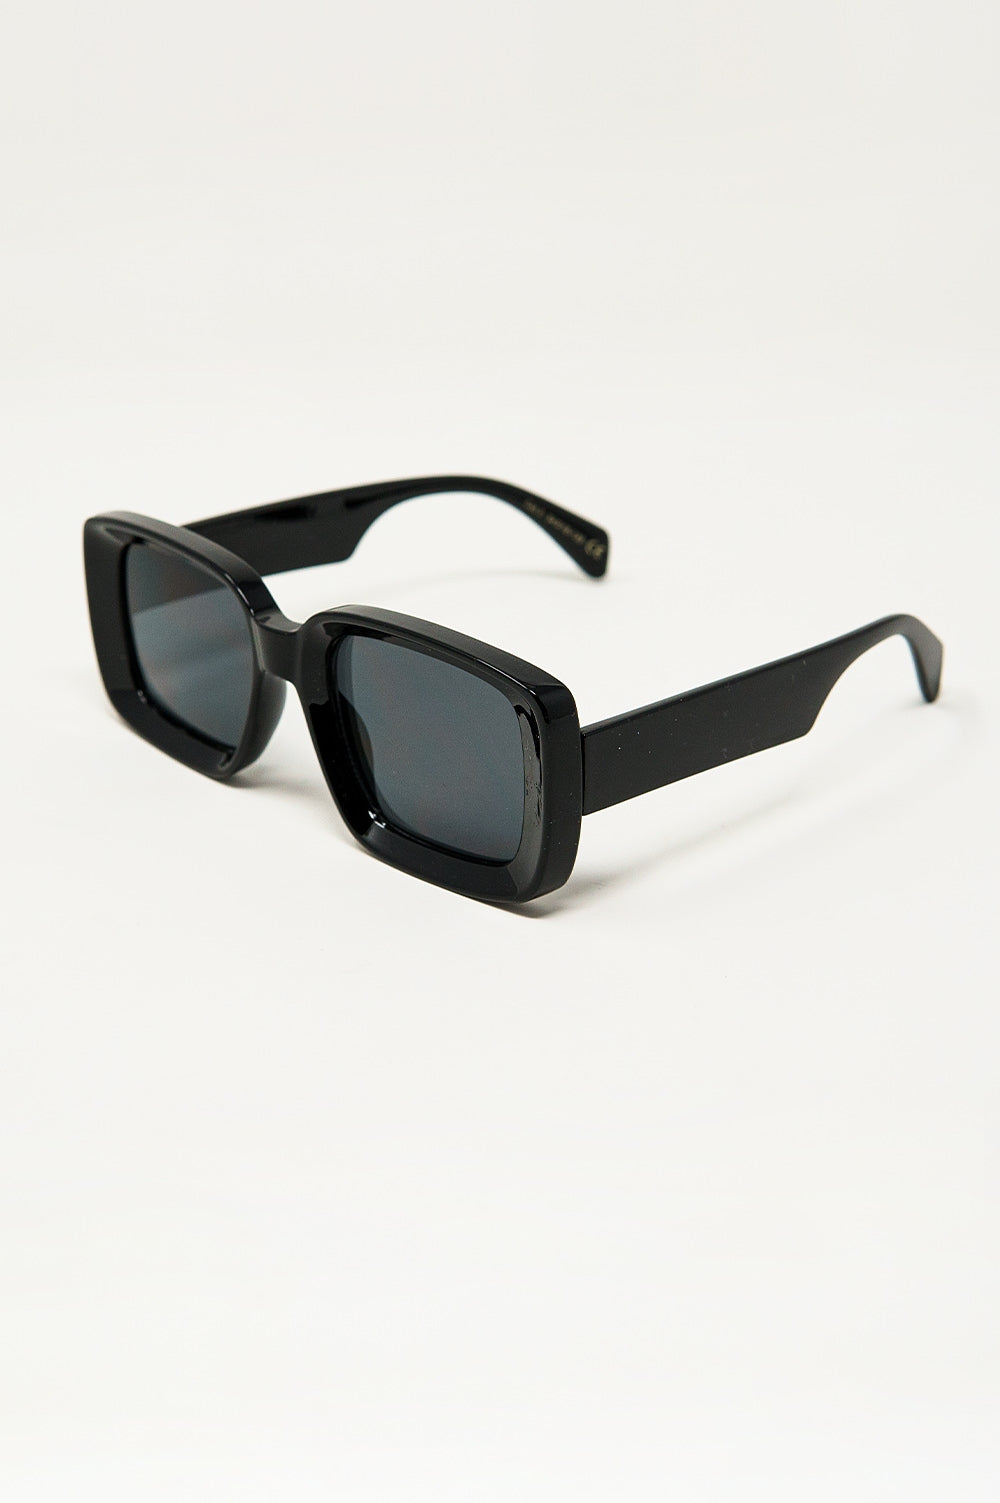 Q2 Oversized Rectangular Sunglasses With Wide Frame in Black